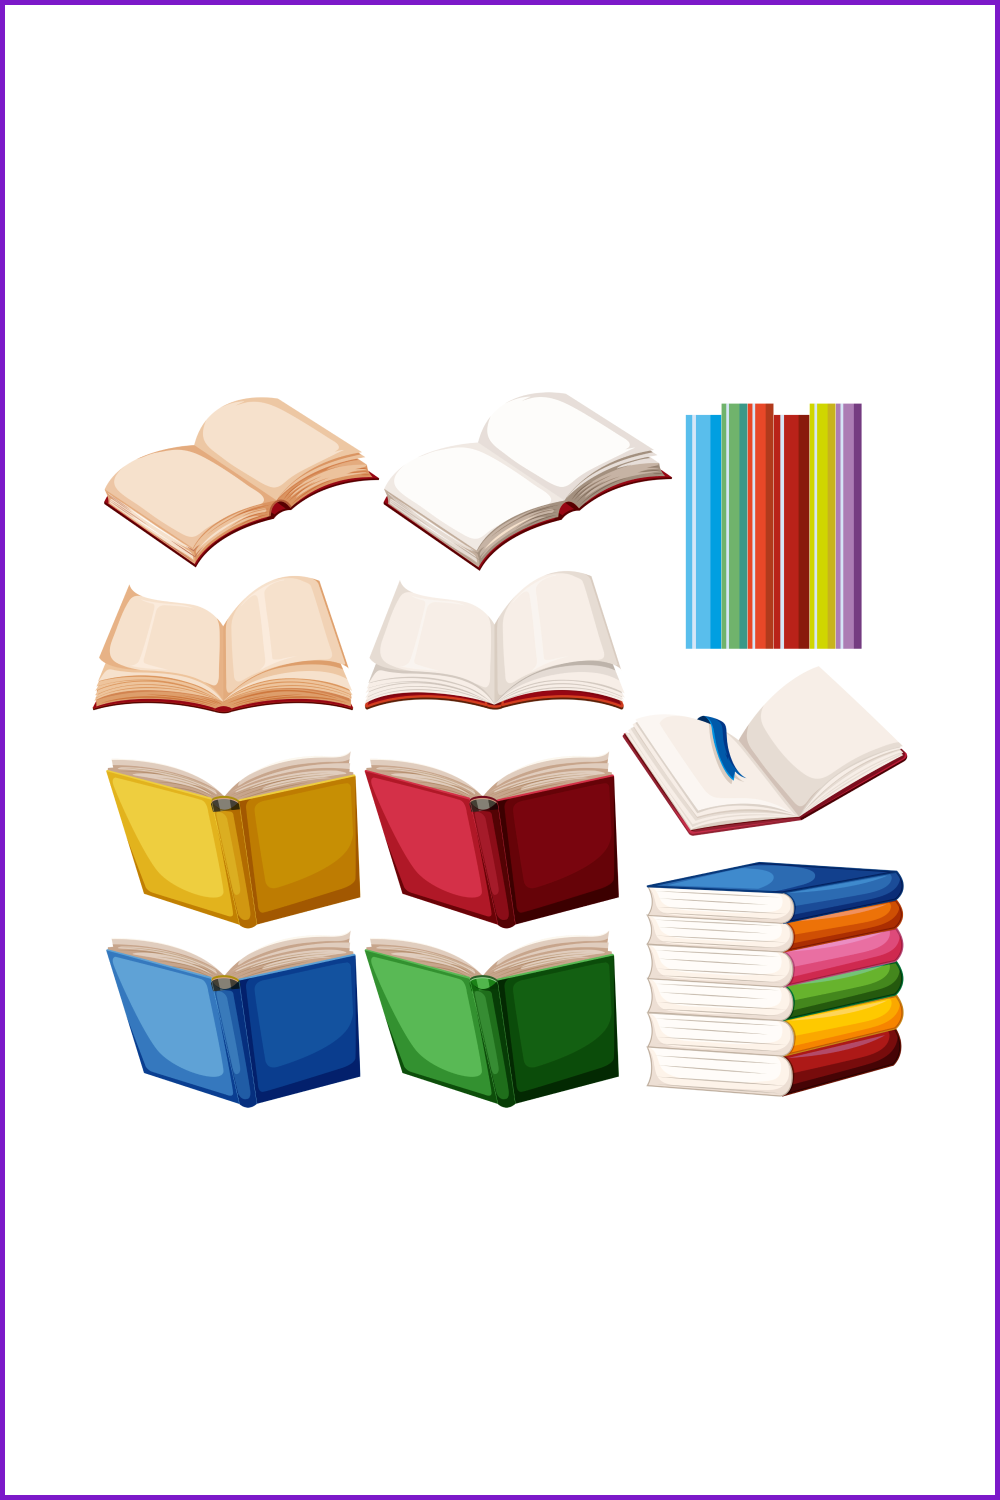 Books with colorful covers in different positions with white and yellow pages.